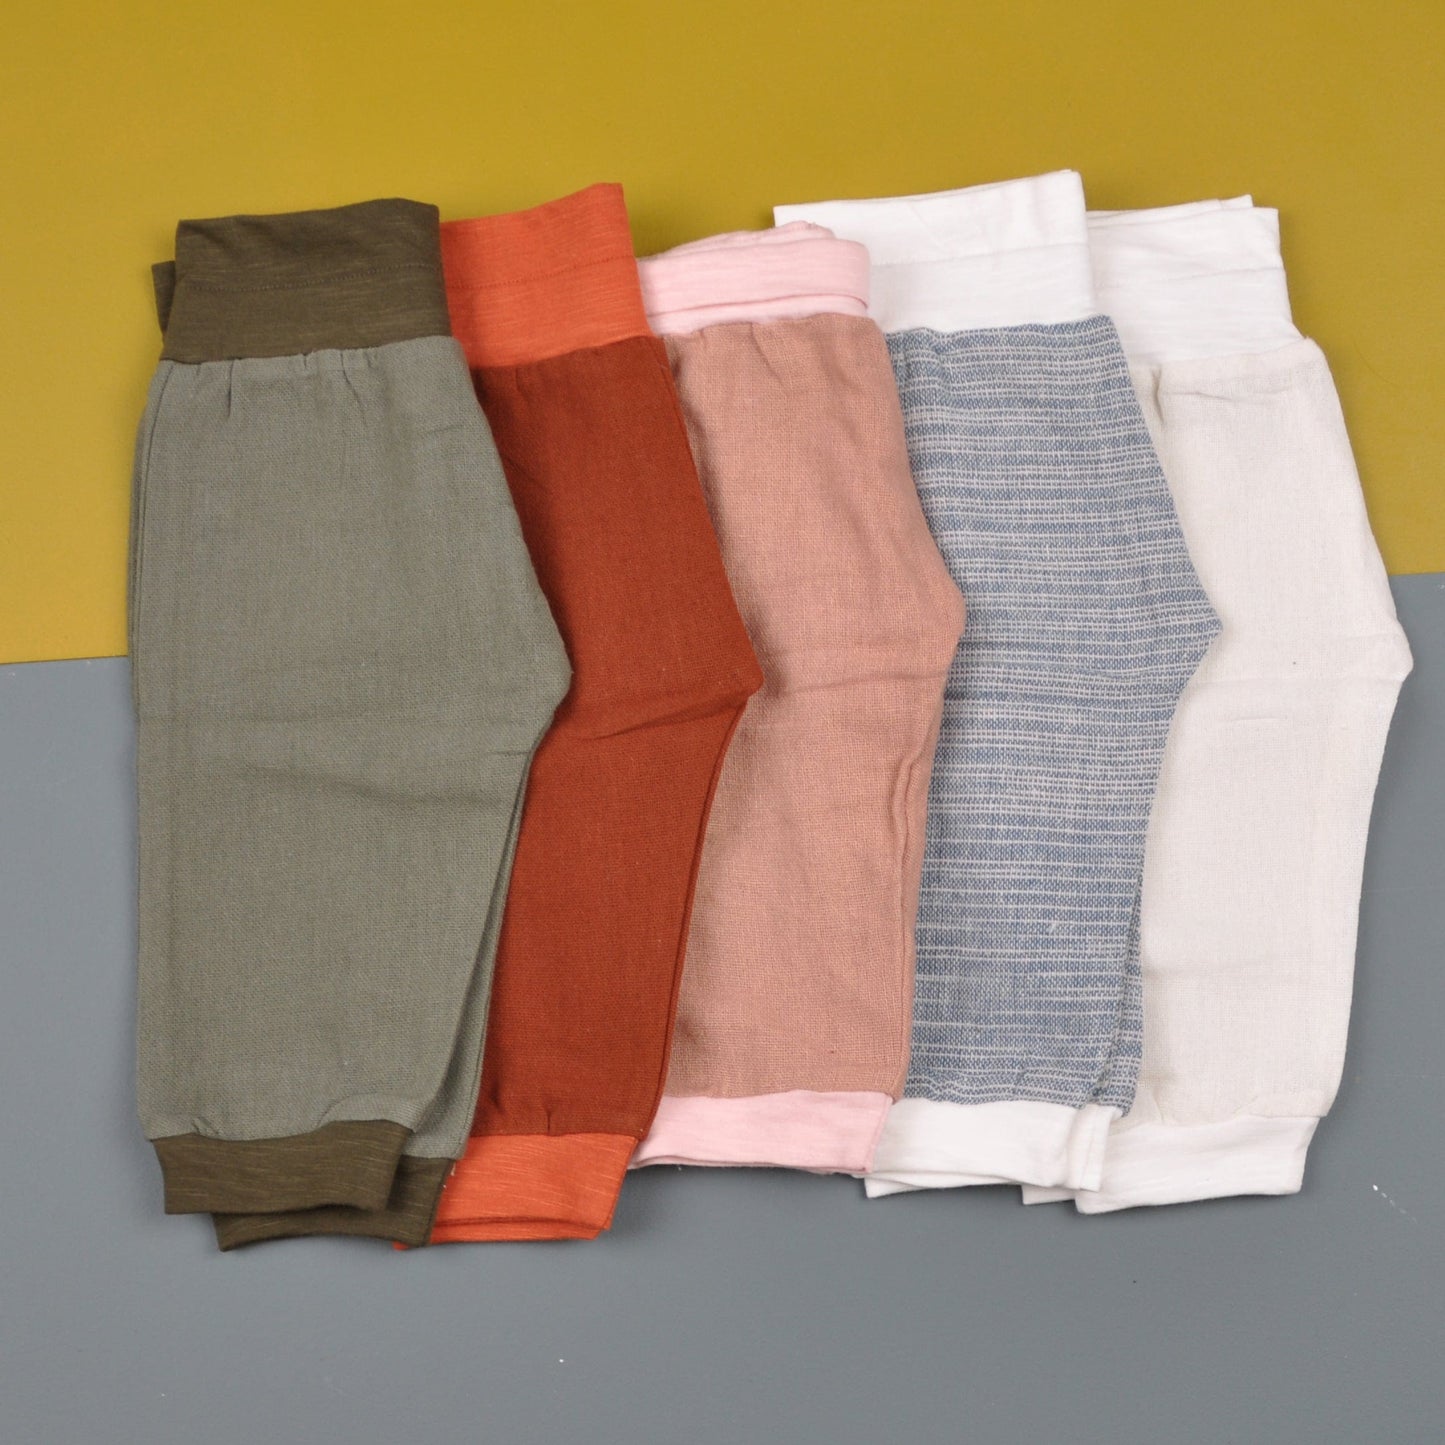 Inka Free Clothing Baby Trousers - Various Colours